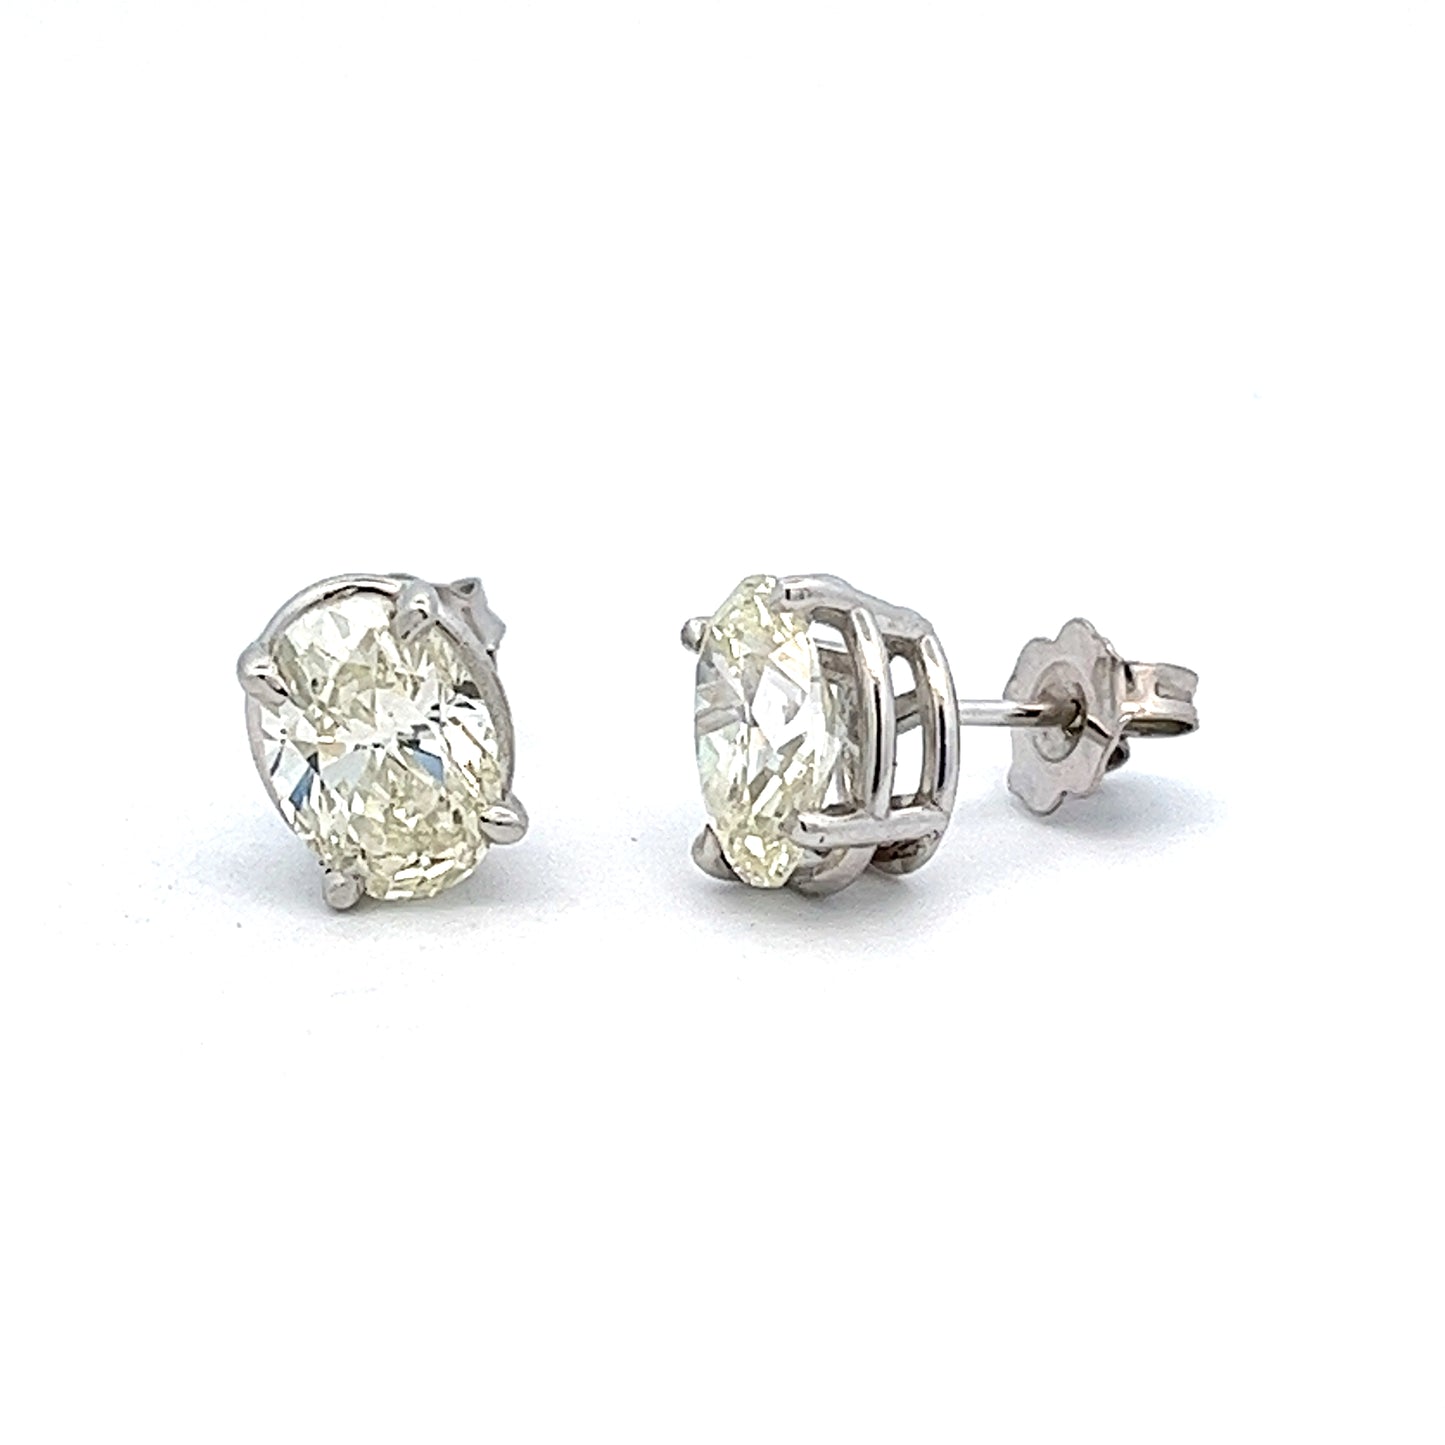 2.71ct total weight Oval diamond earrings